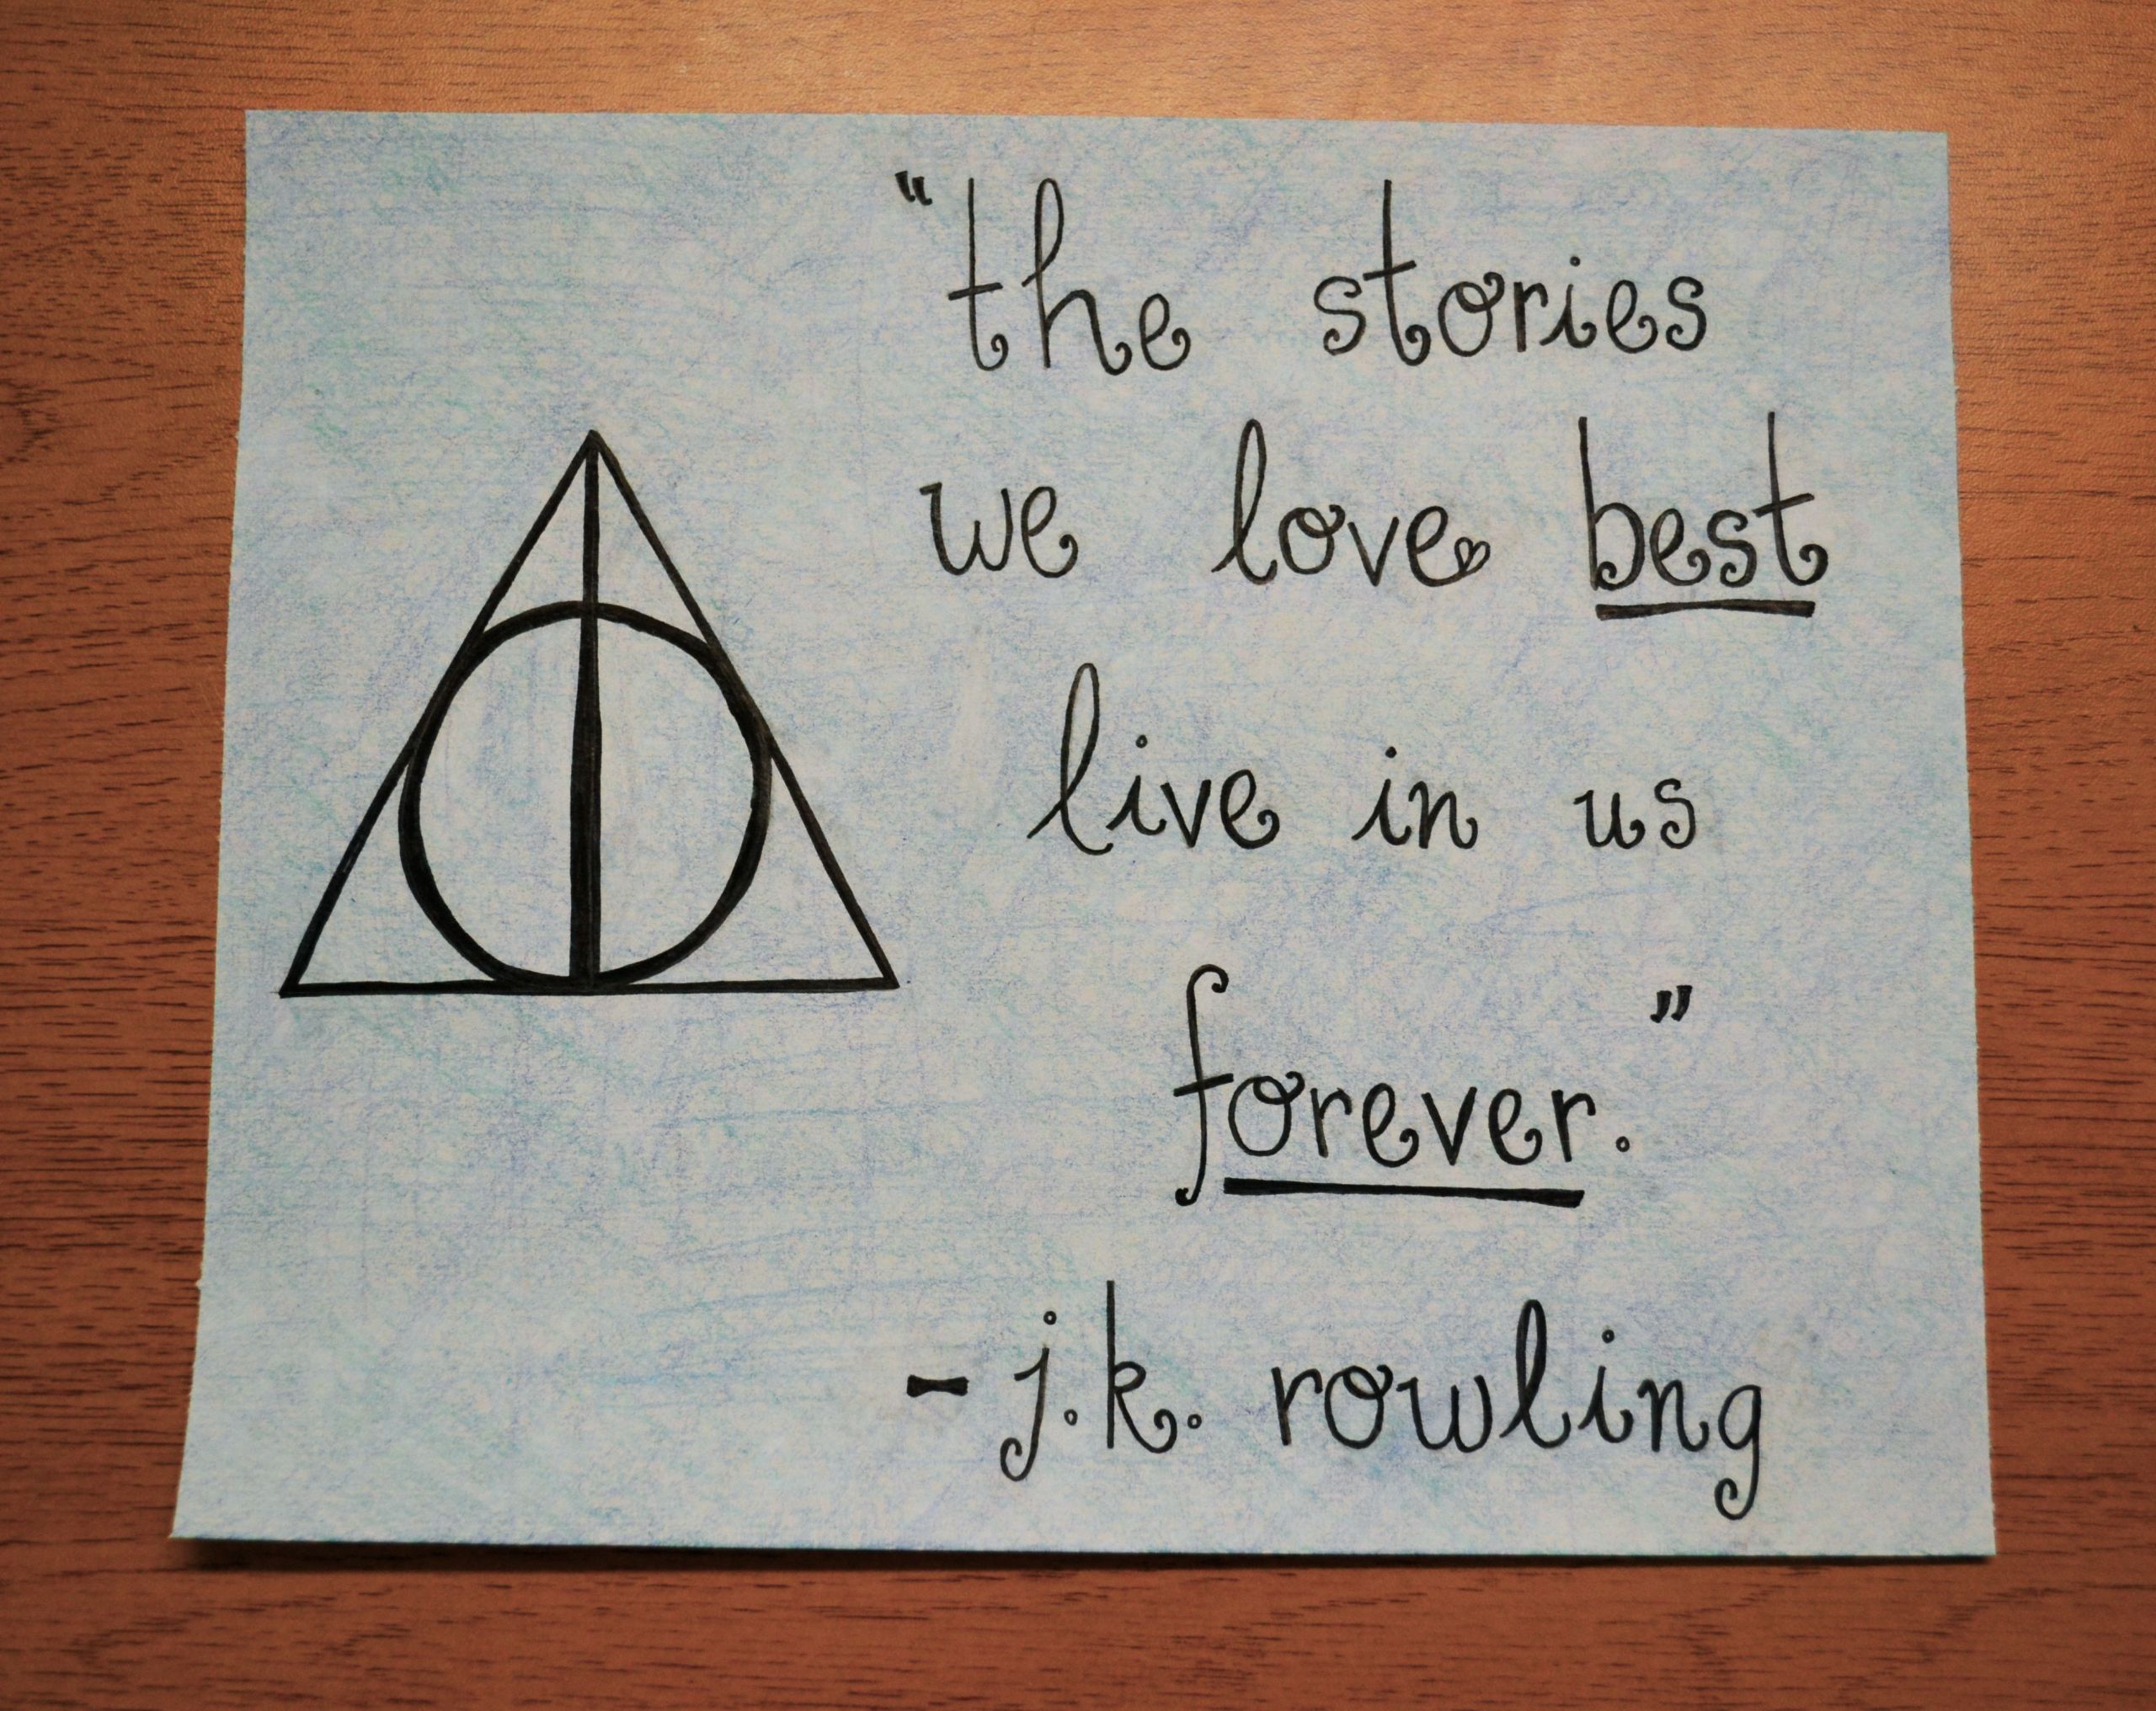 Romantic Harry Potter Quotes
 We have the most romantic lines we have ever read more